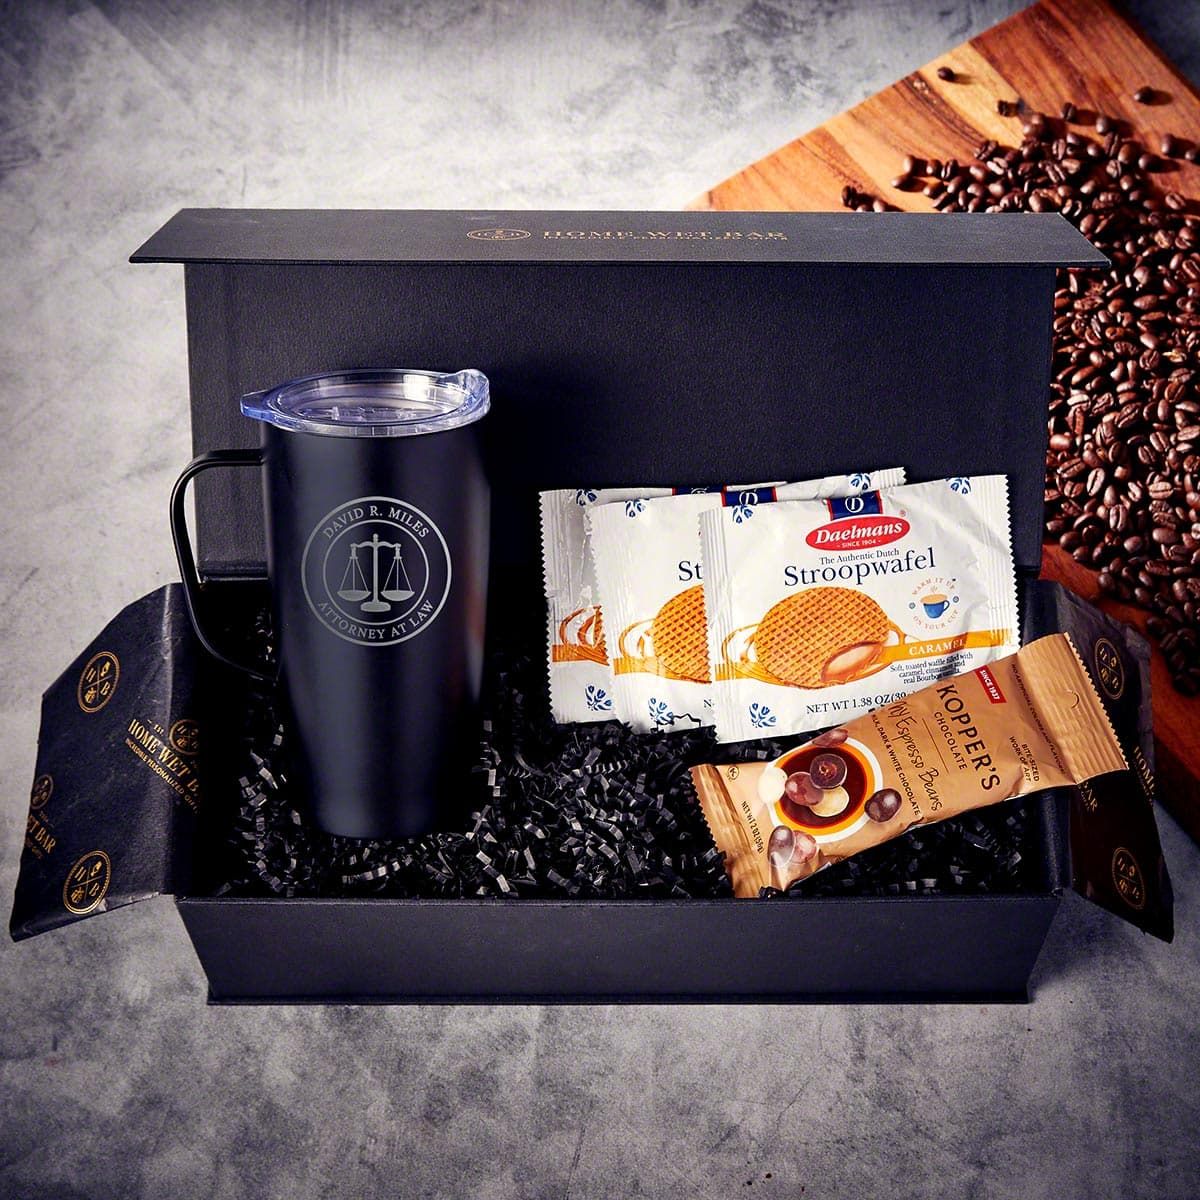 https://images.homewetbar.com/media/catalog/product/l/u/luxury-personalized-lawyer-gifts-coffee-gift-scales-of-justice-p-10514.jpg?store=default&image-type=image